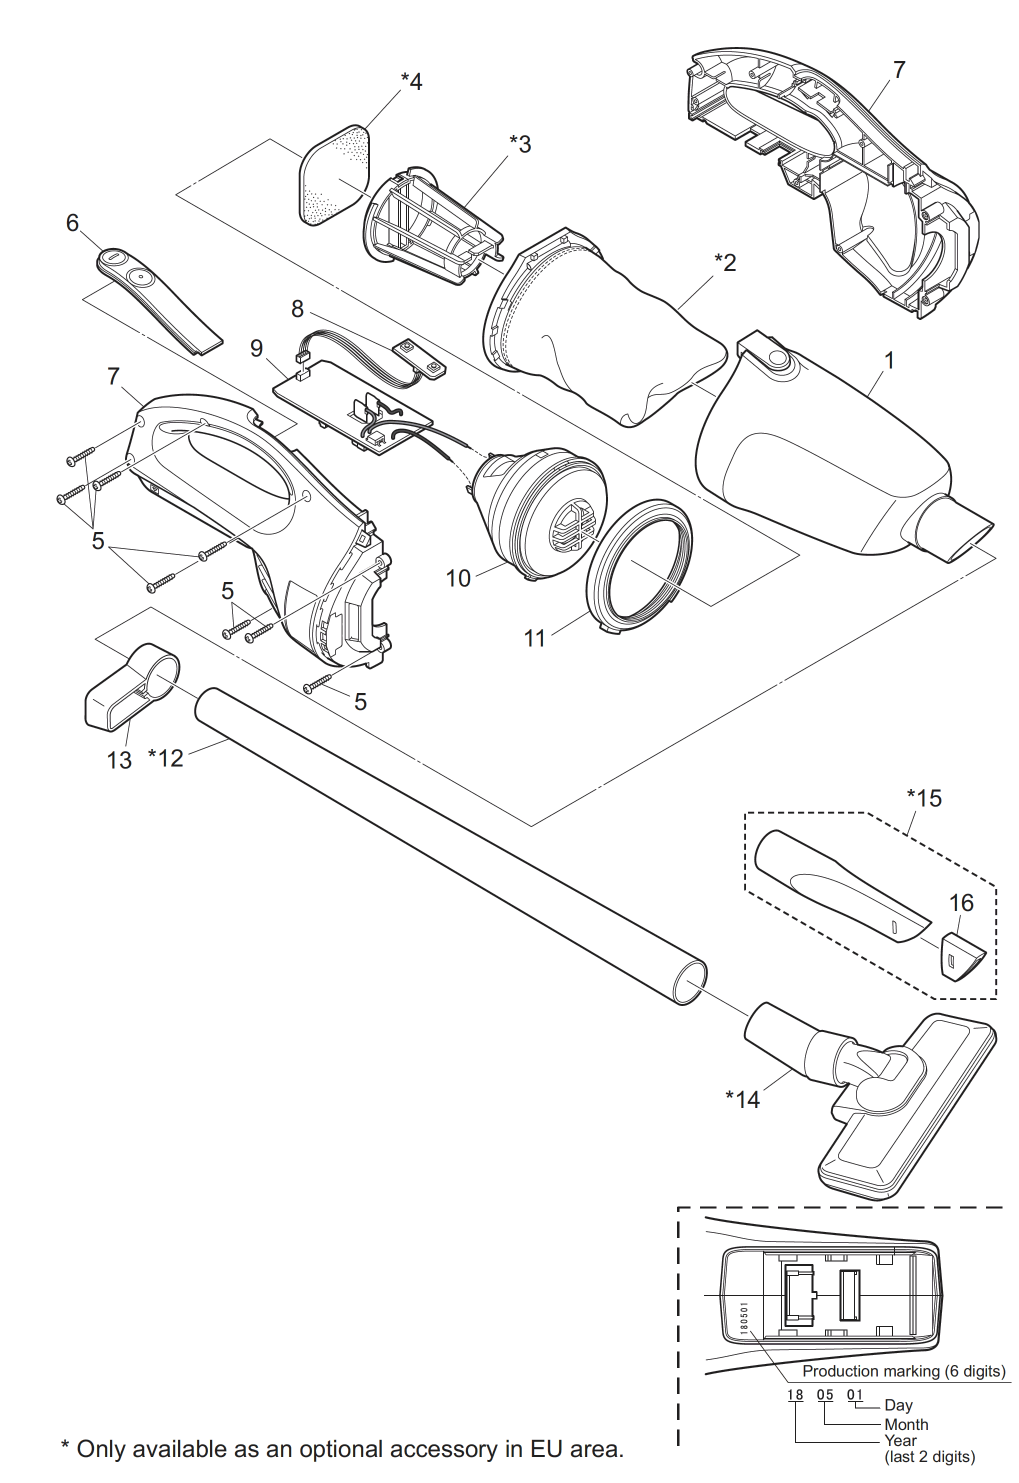 EY37A3: Exploded View